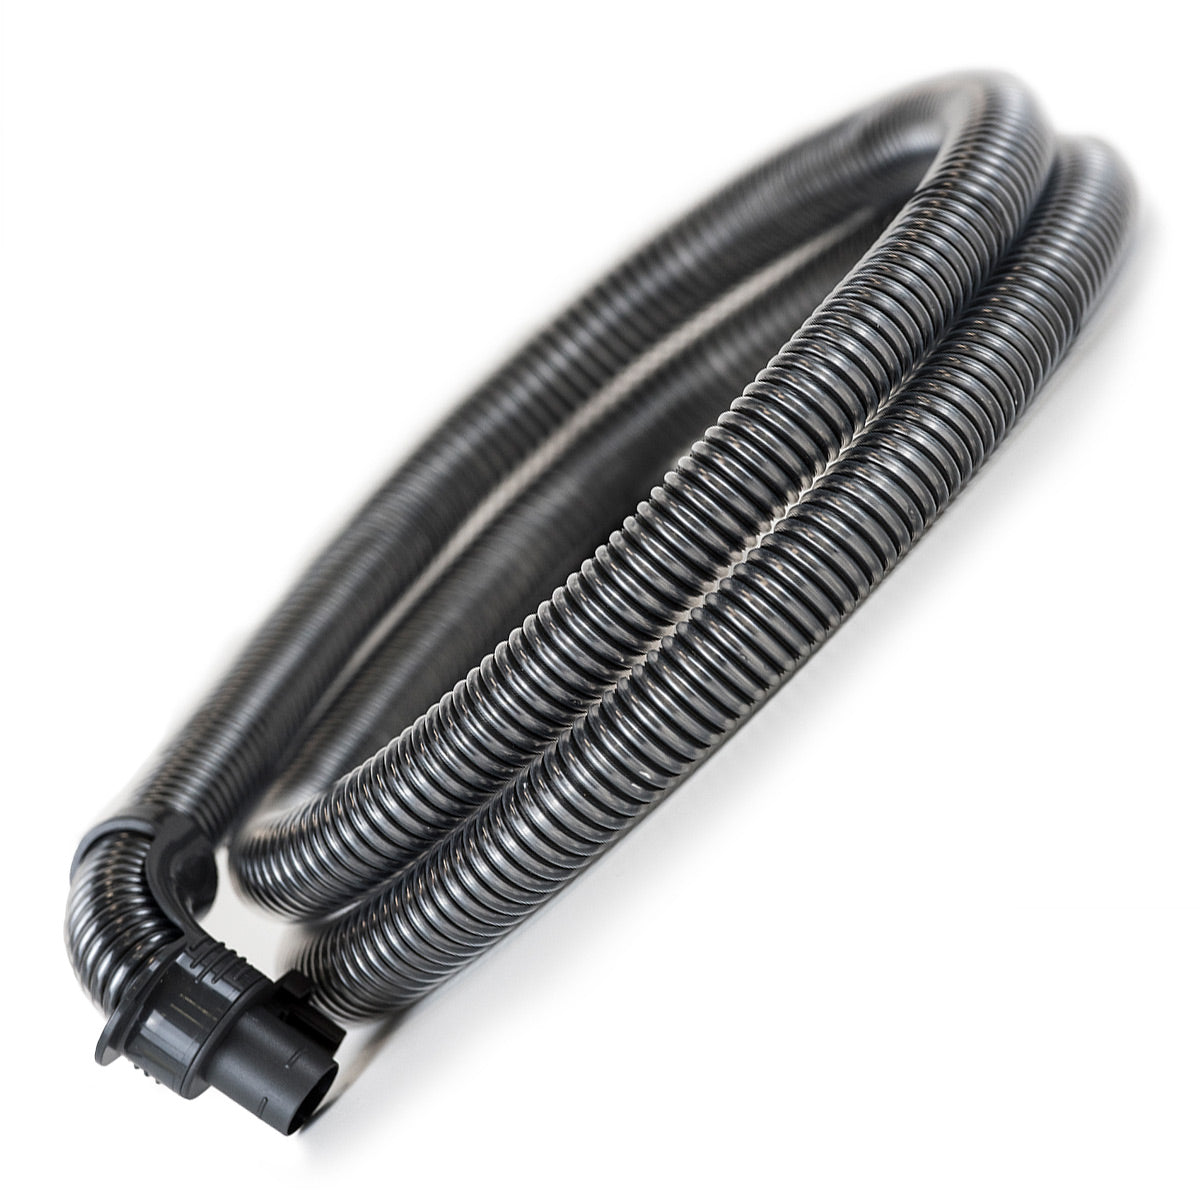 ThermoSmart Heated Tubing for F&P SleepStyle Series CPAP Machines